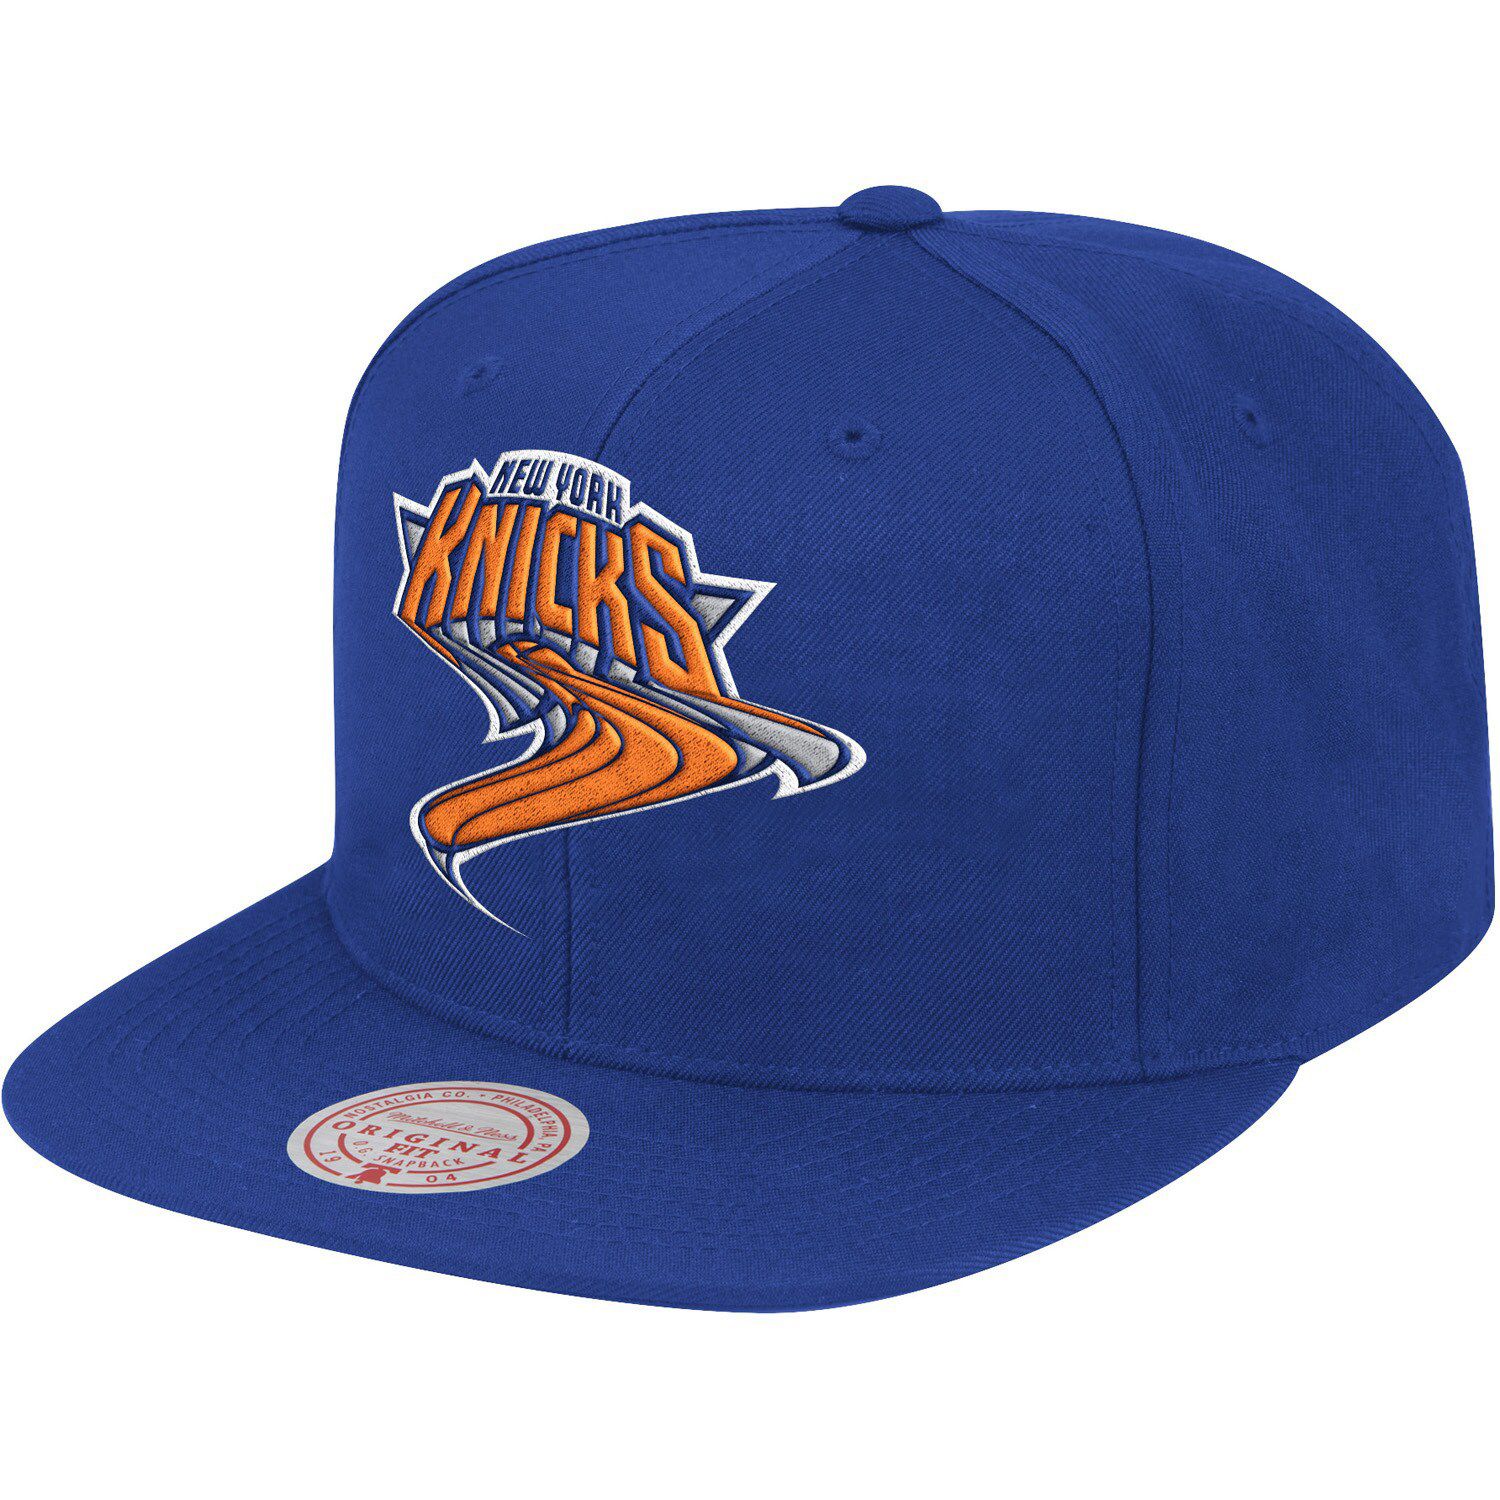 Image for Unbranded Men's Mitchell & Ness Royal New York Knicks Warp Snapback Hat at Kohl's.